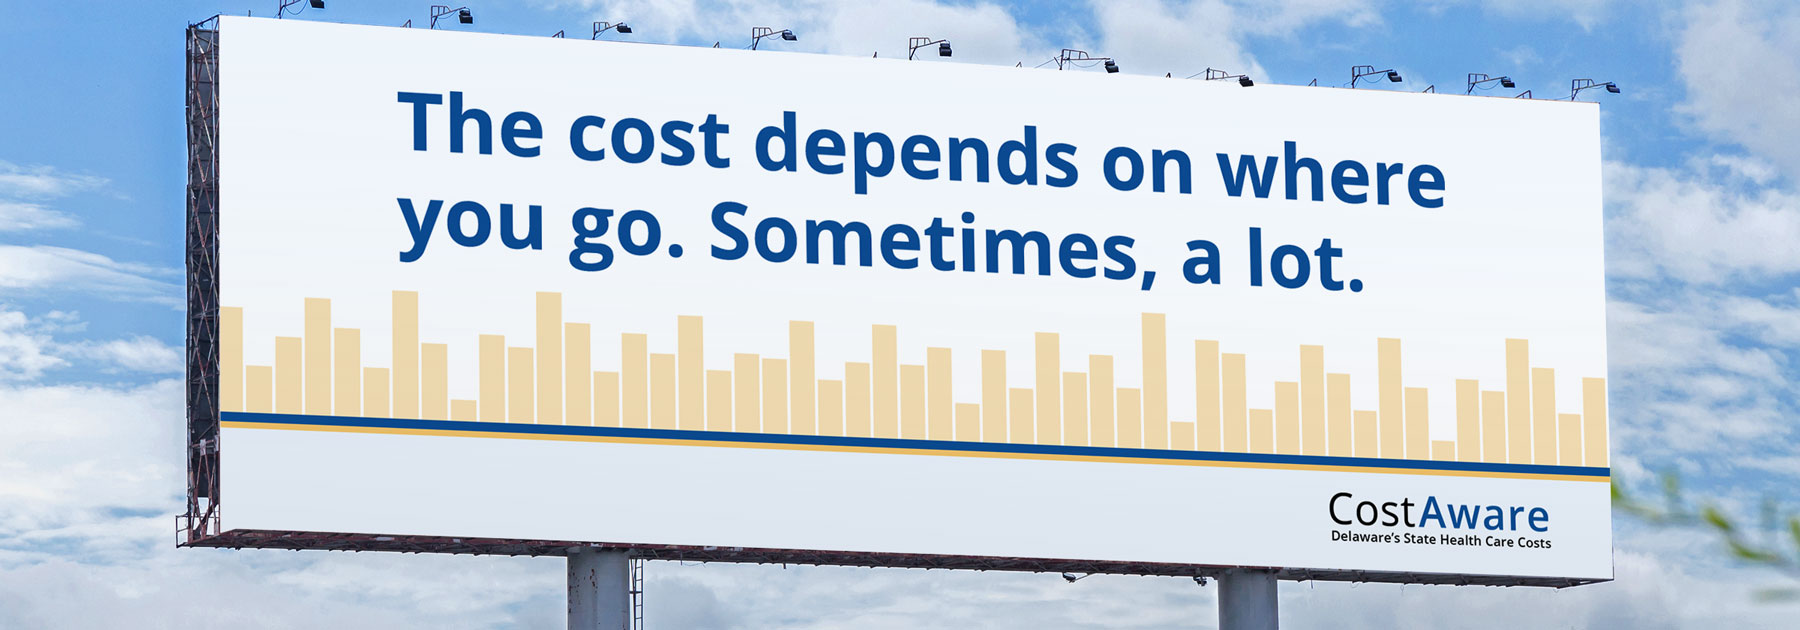 Billboard: The cost depend on where you go sometimes, a lot.